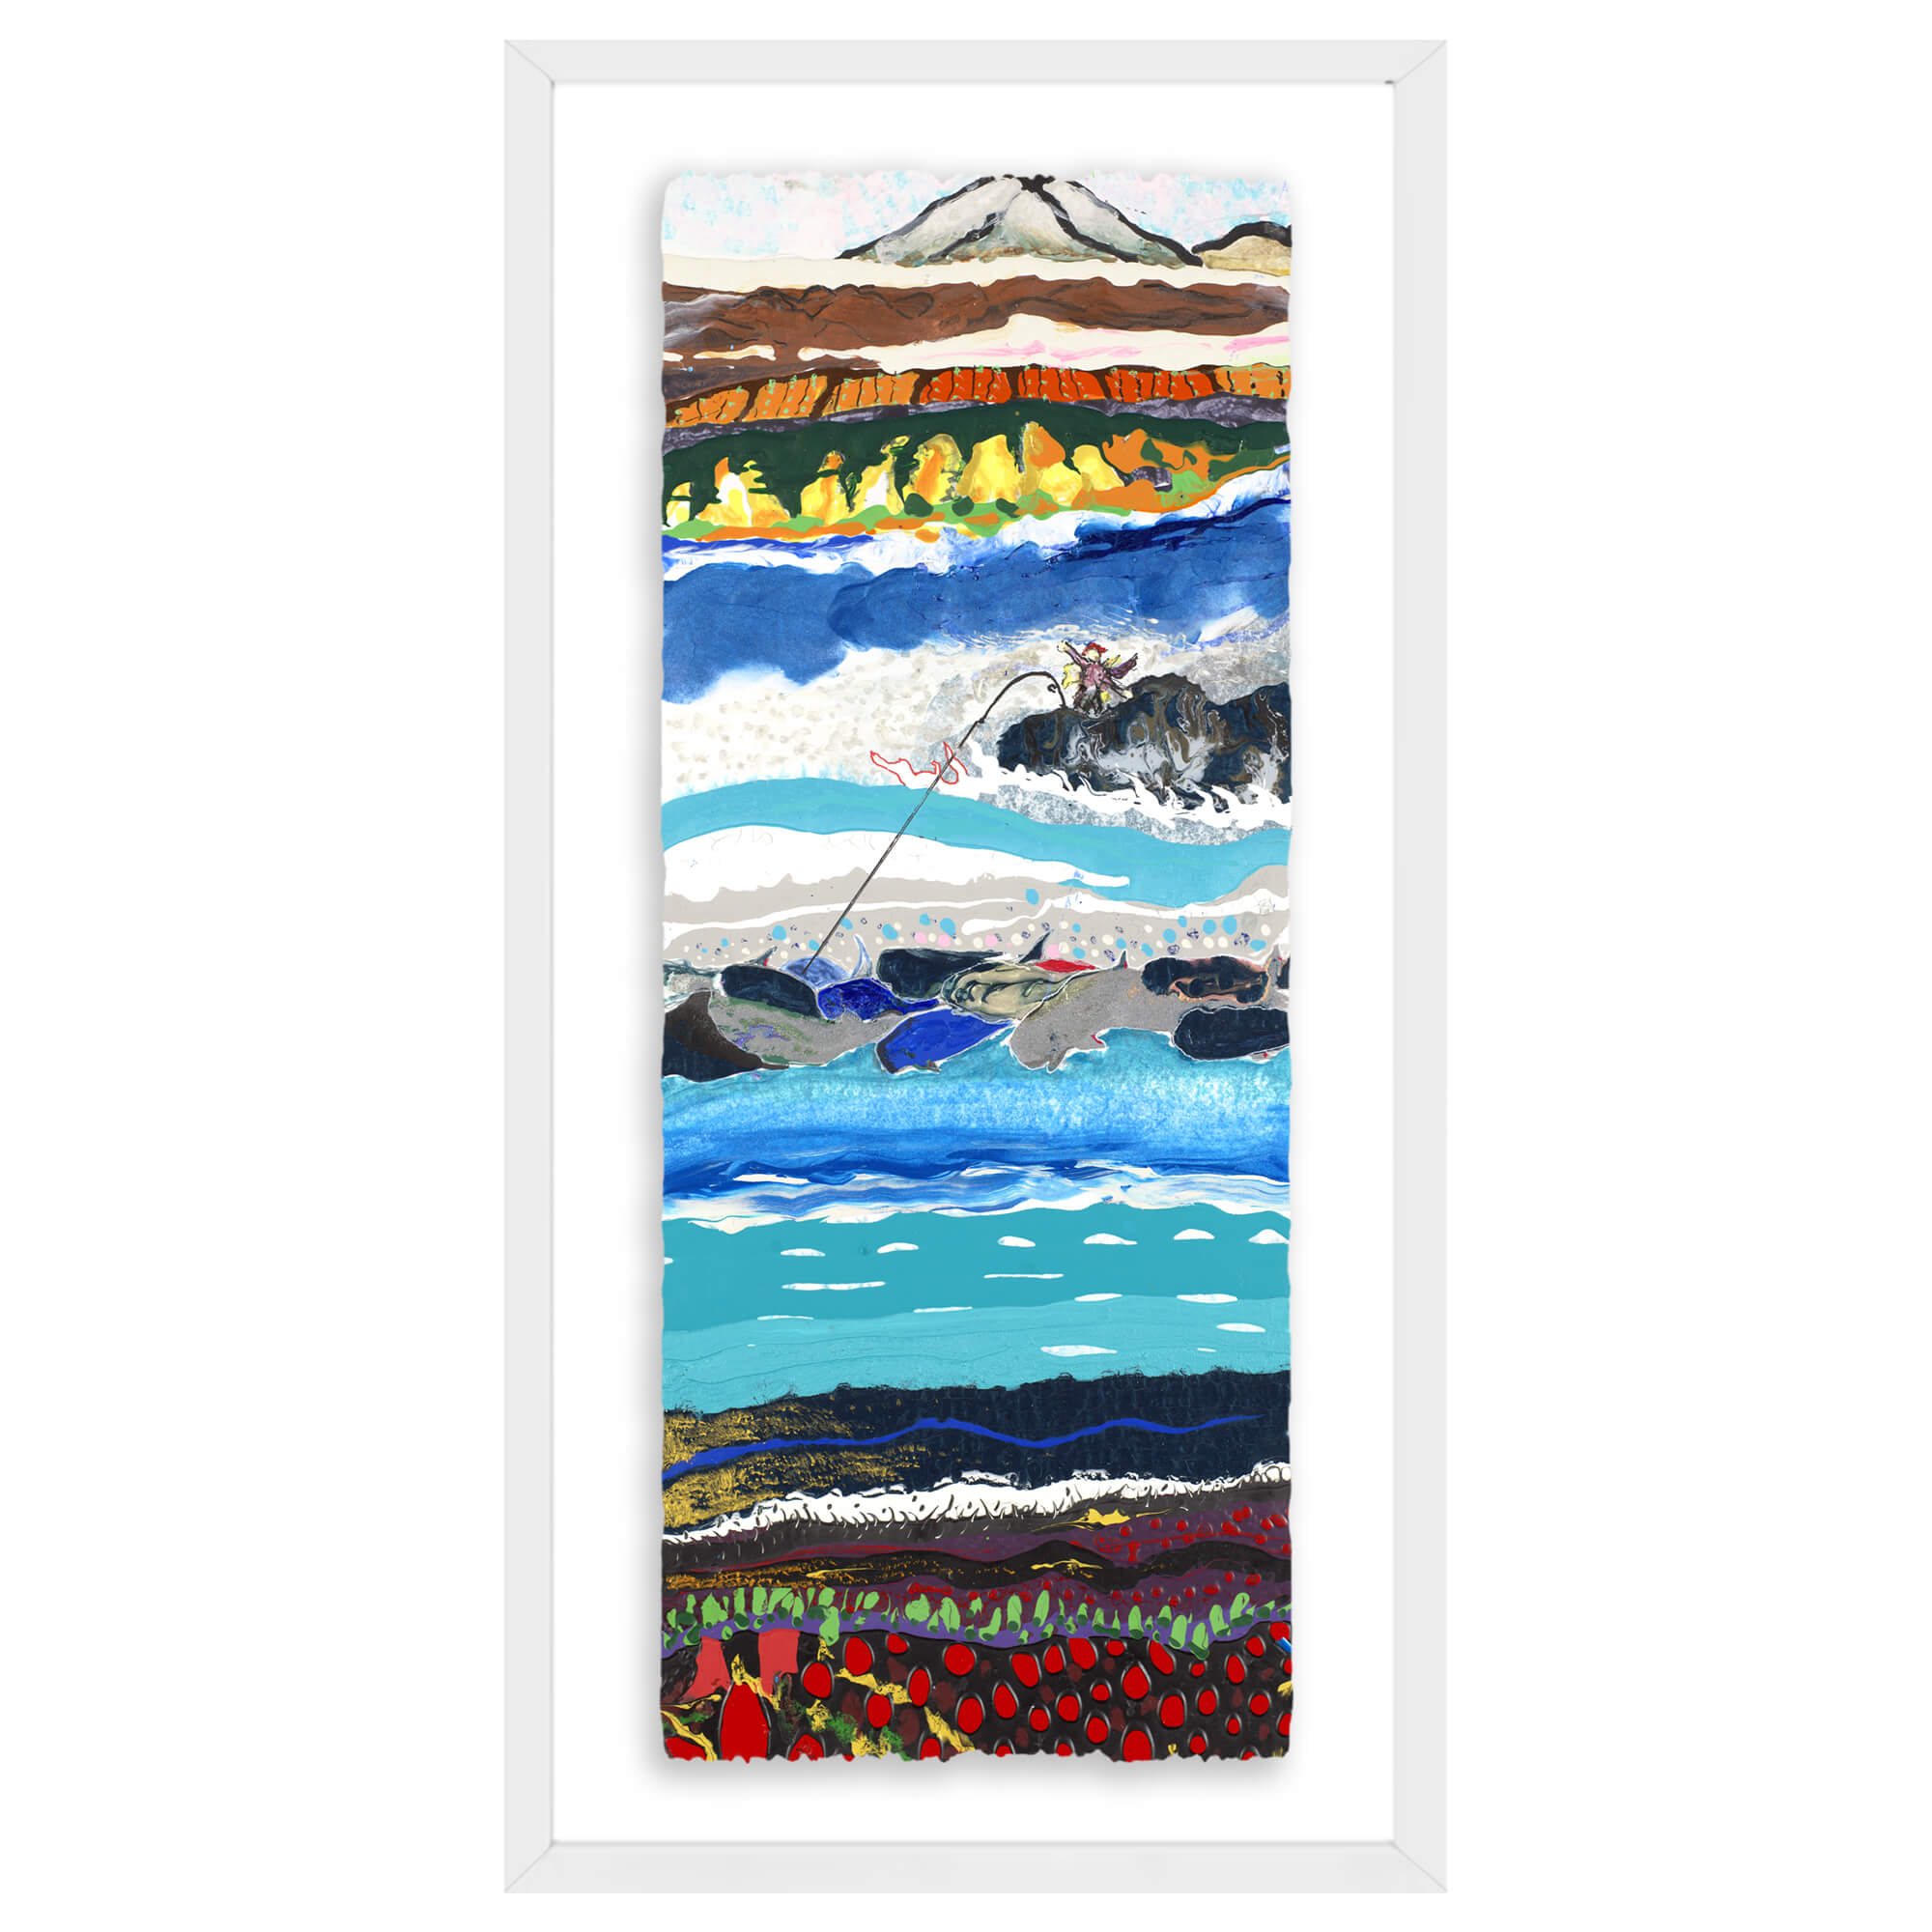 paper art print featuring an abstract painting of the different layers of the ocean and the surfaceby Hawaii artist Robert Hazzard